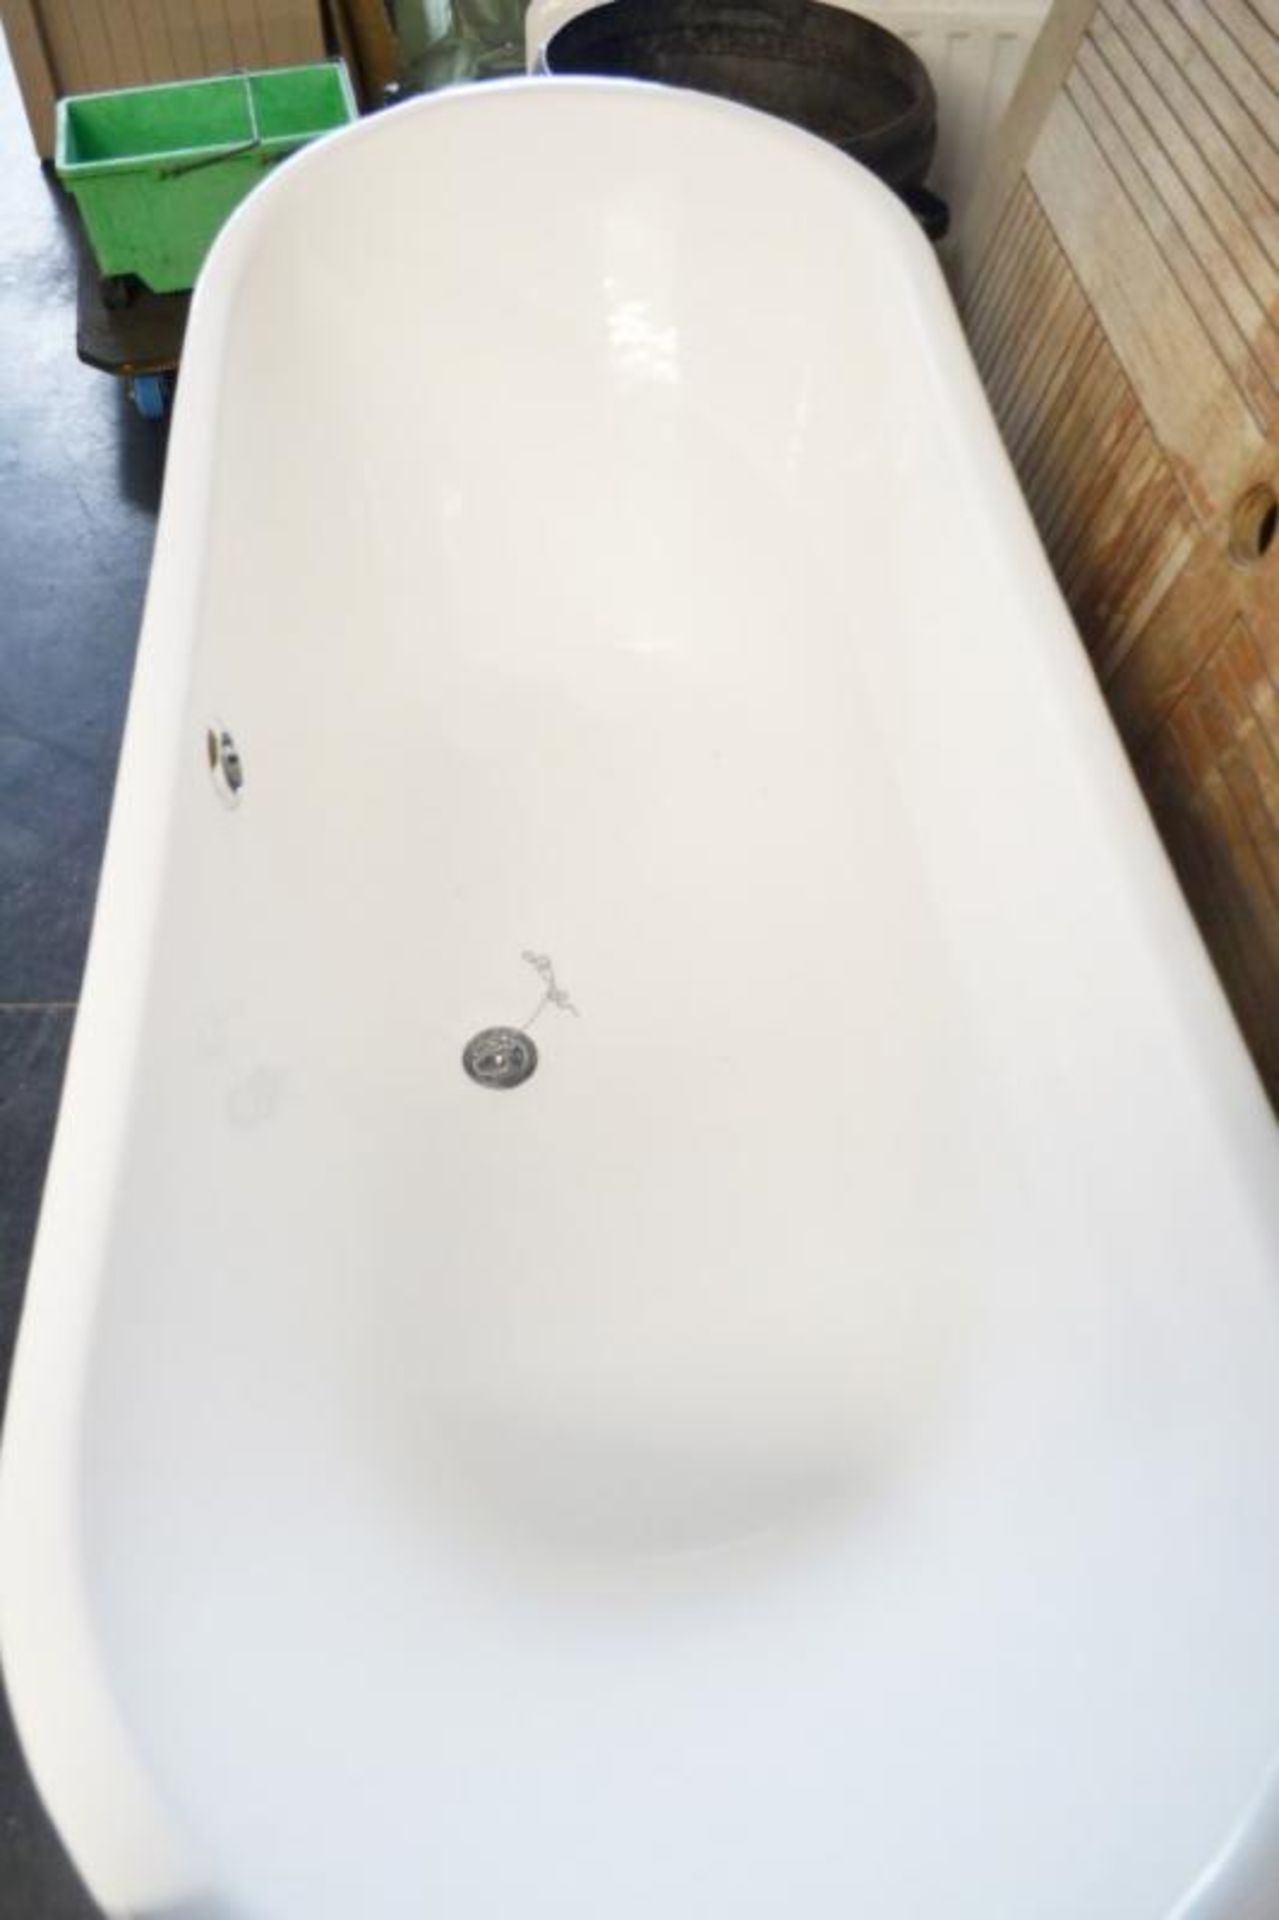 1 x Cast Iron Bath With Stainless Steel Exterior - CL439 - Location: Ilkey LS29 - Used In Good Condi - Image 7 of 8